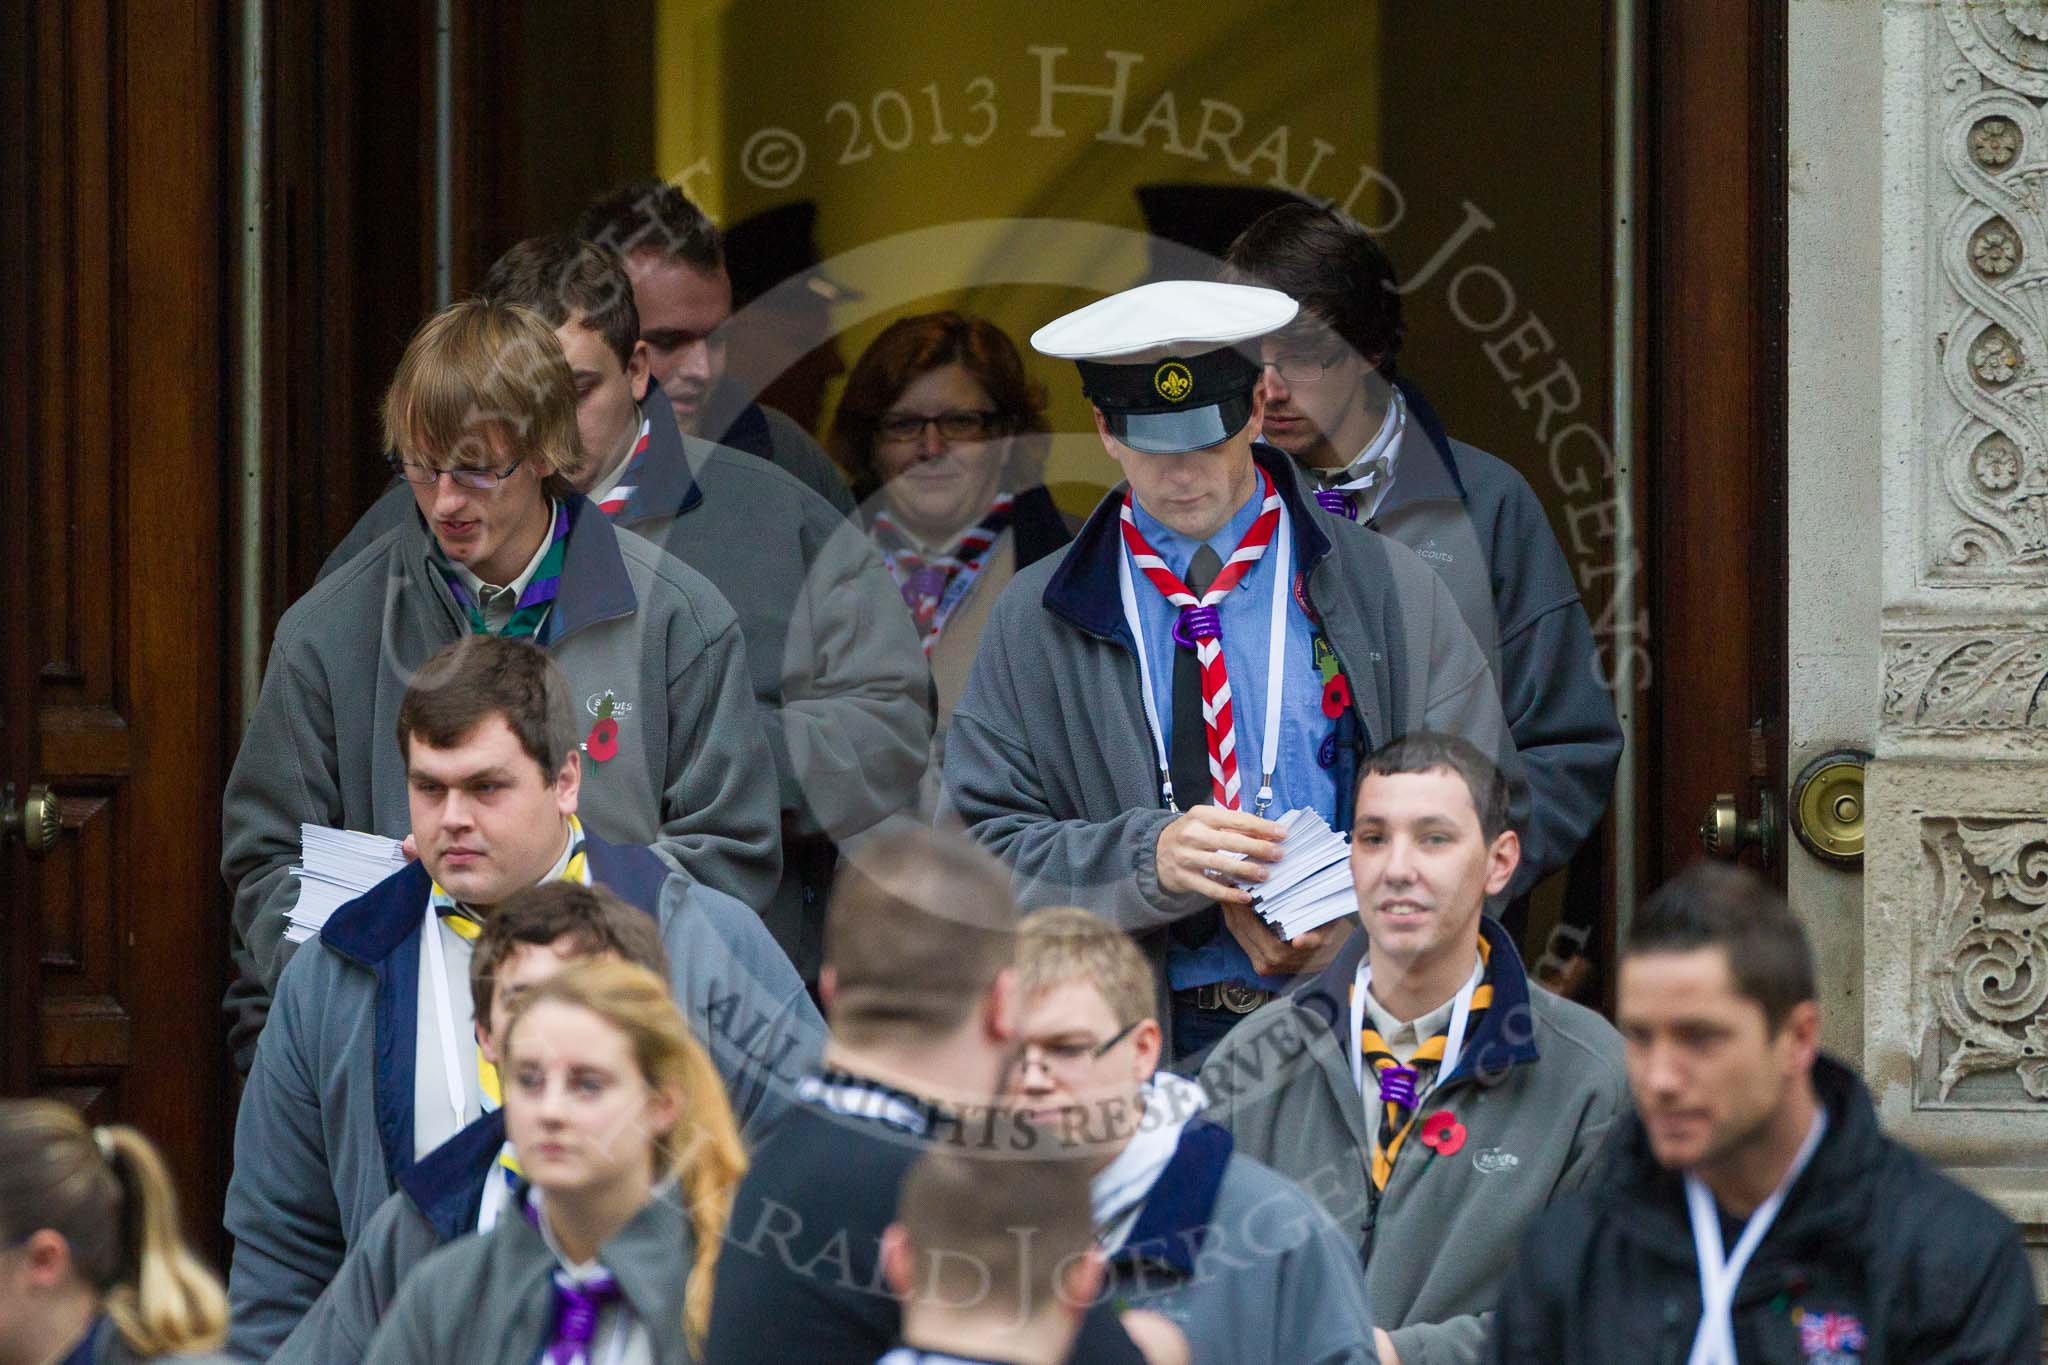 Remembrance Sunday at the Cenotaph 2015: The Queen's Scouts emerging from the Foreign- and Commonwealth Office to distribute leaflets with information about the service. Image #10, 08 November 2015 09:11 Whitehall, London, UK